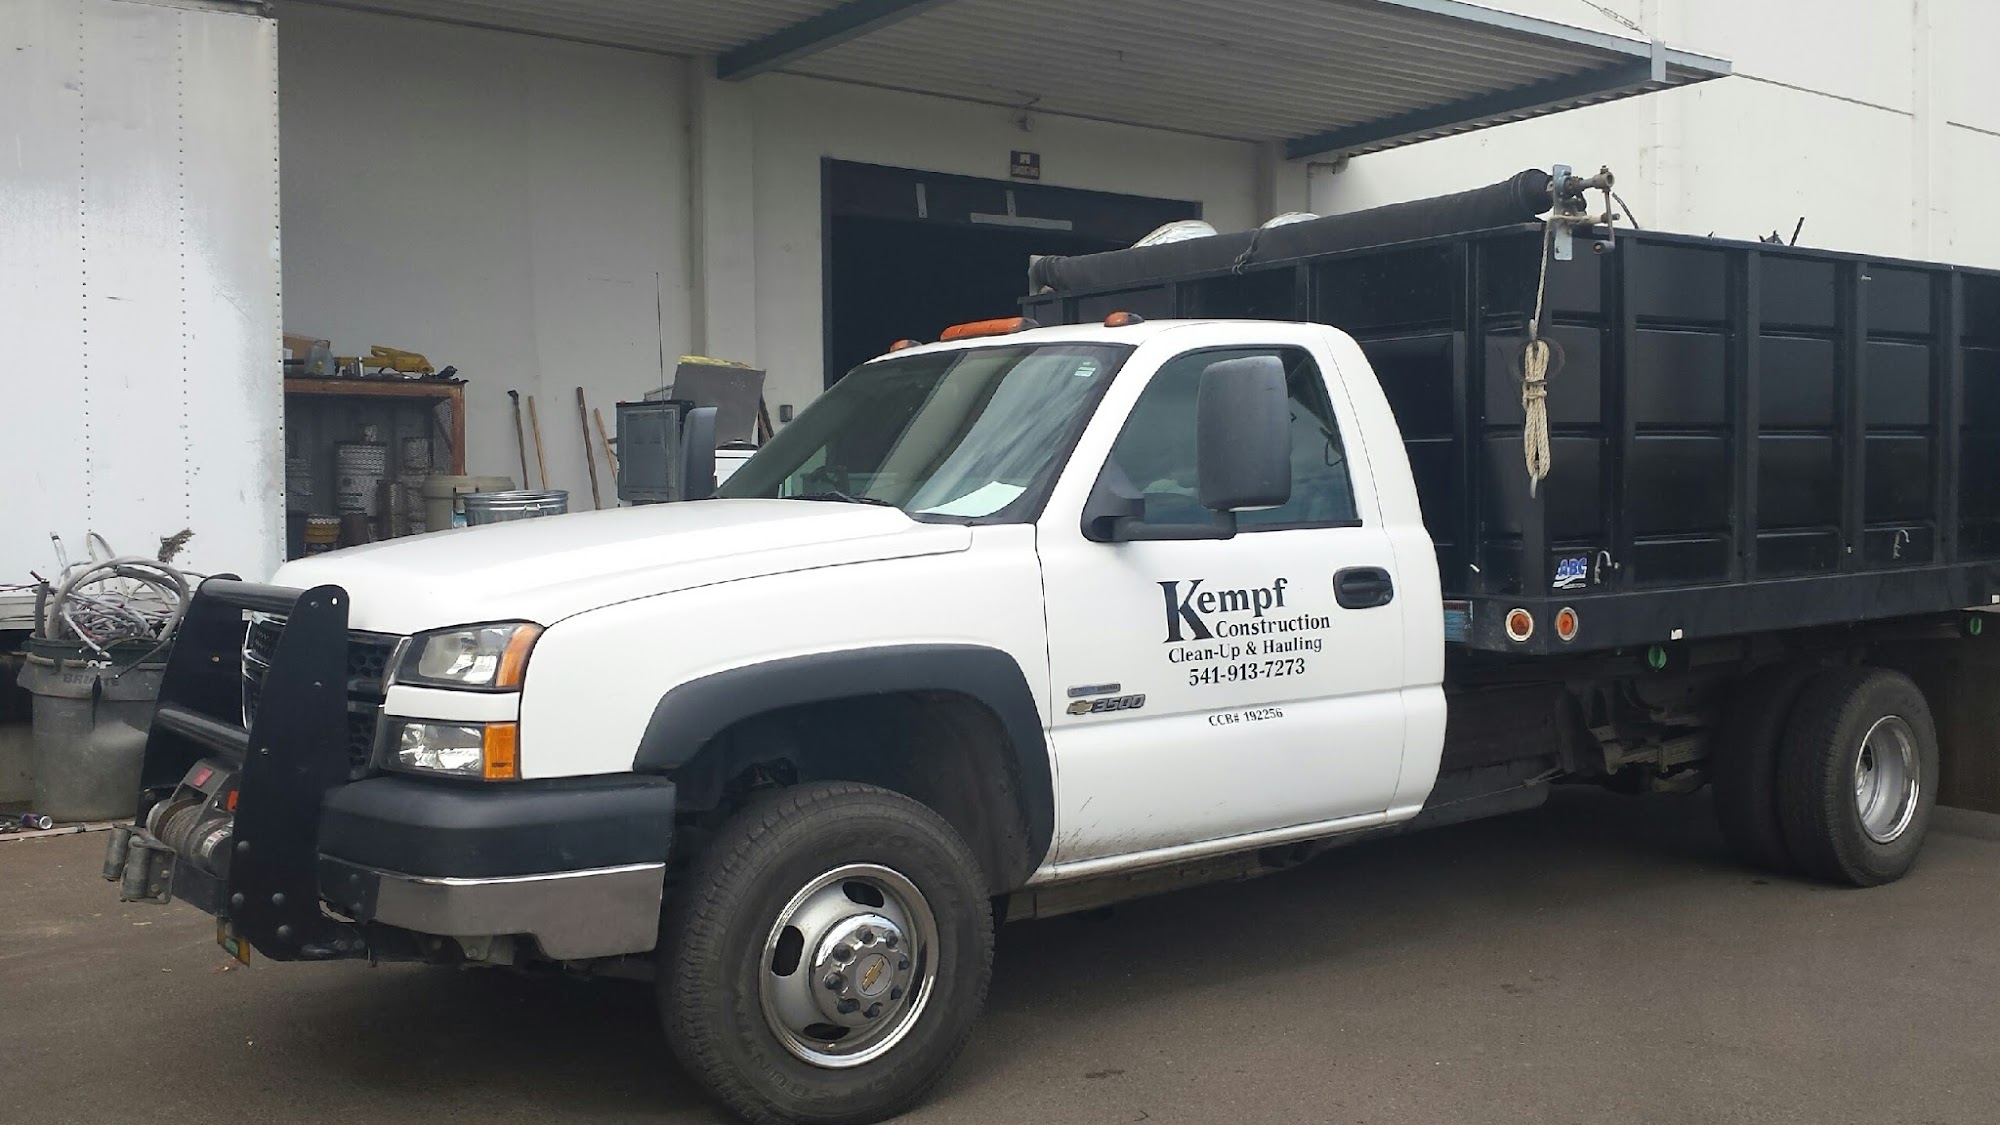 Kempf Construction - Siding & Painting Contractor